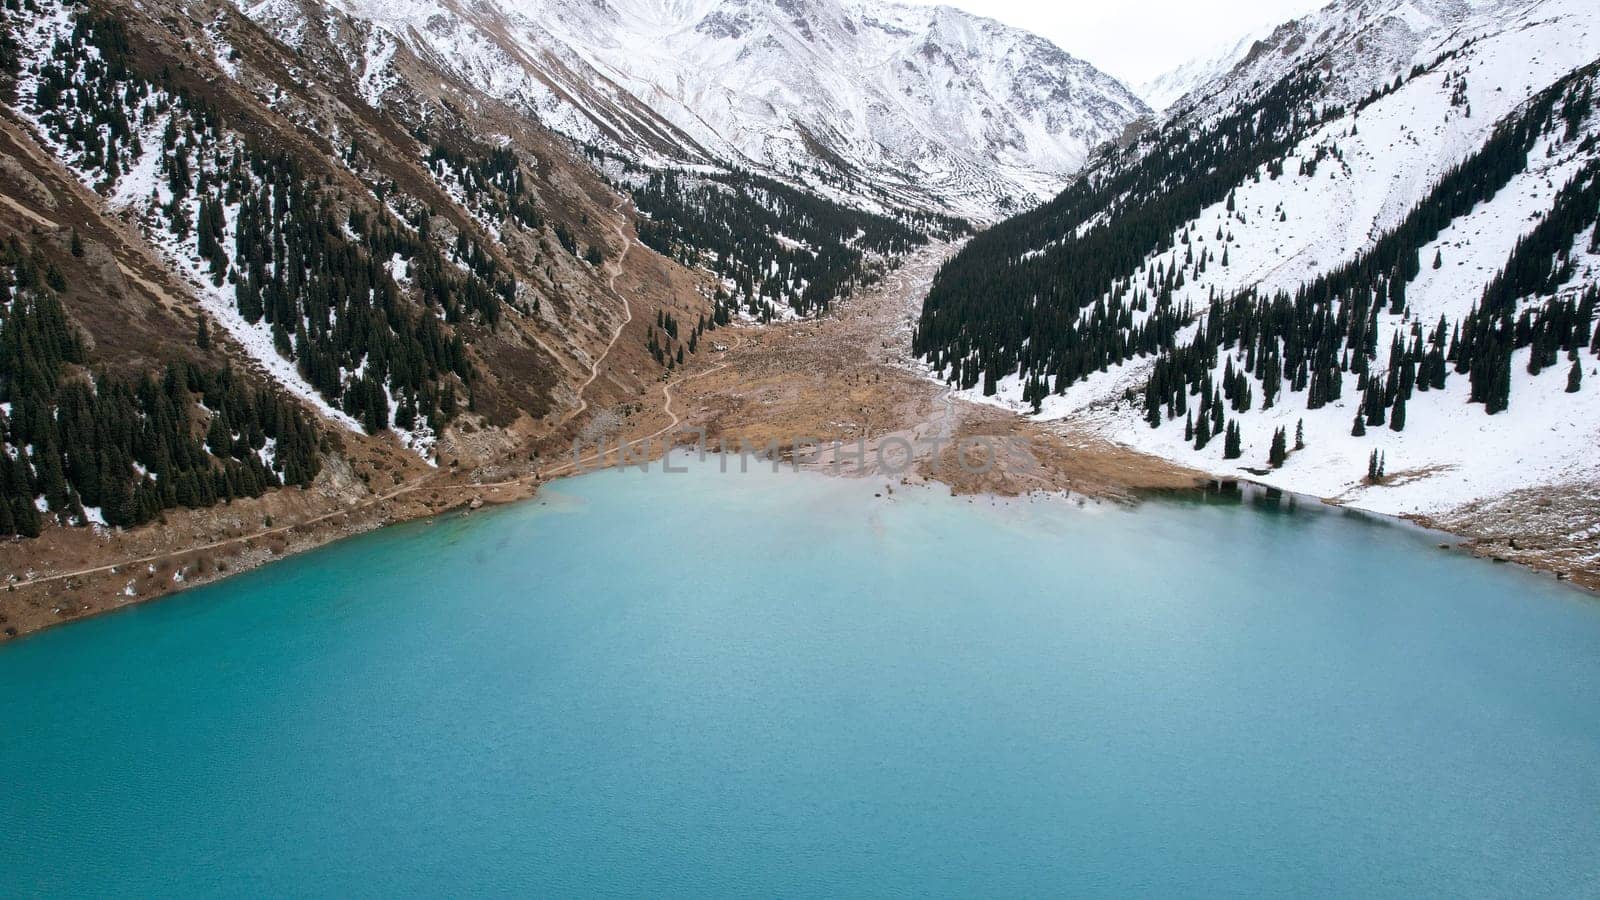 A lake in the mountains with turquoise blue water. Drone view of clear water, coniferous trees and snowy mountains. People walk along the shore, low bushes grow. Big Almaty lake. Kazakhstan